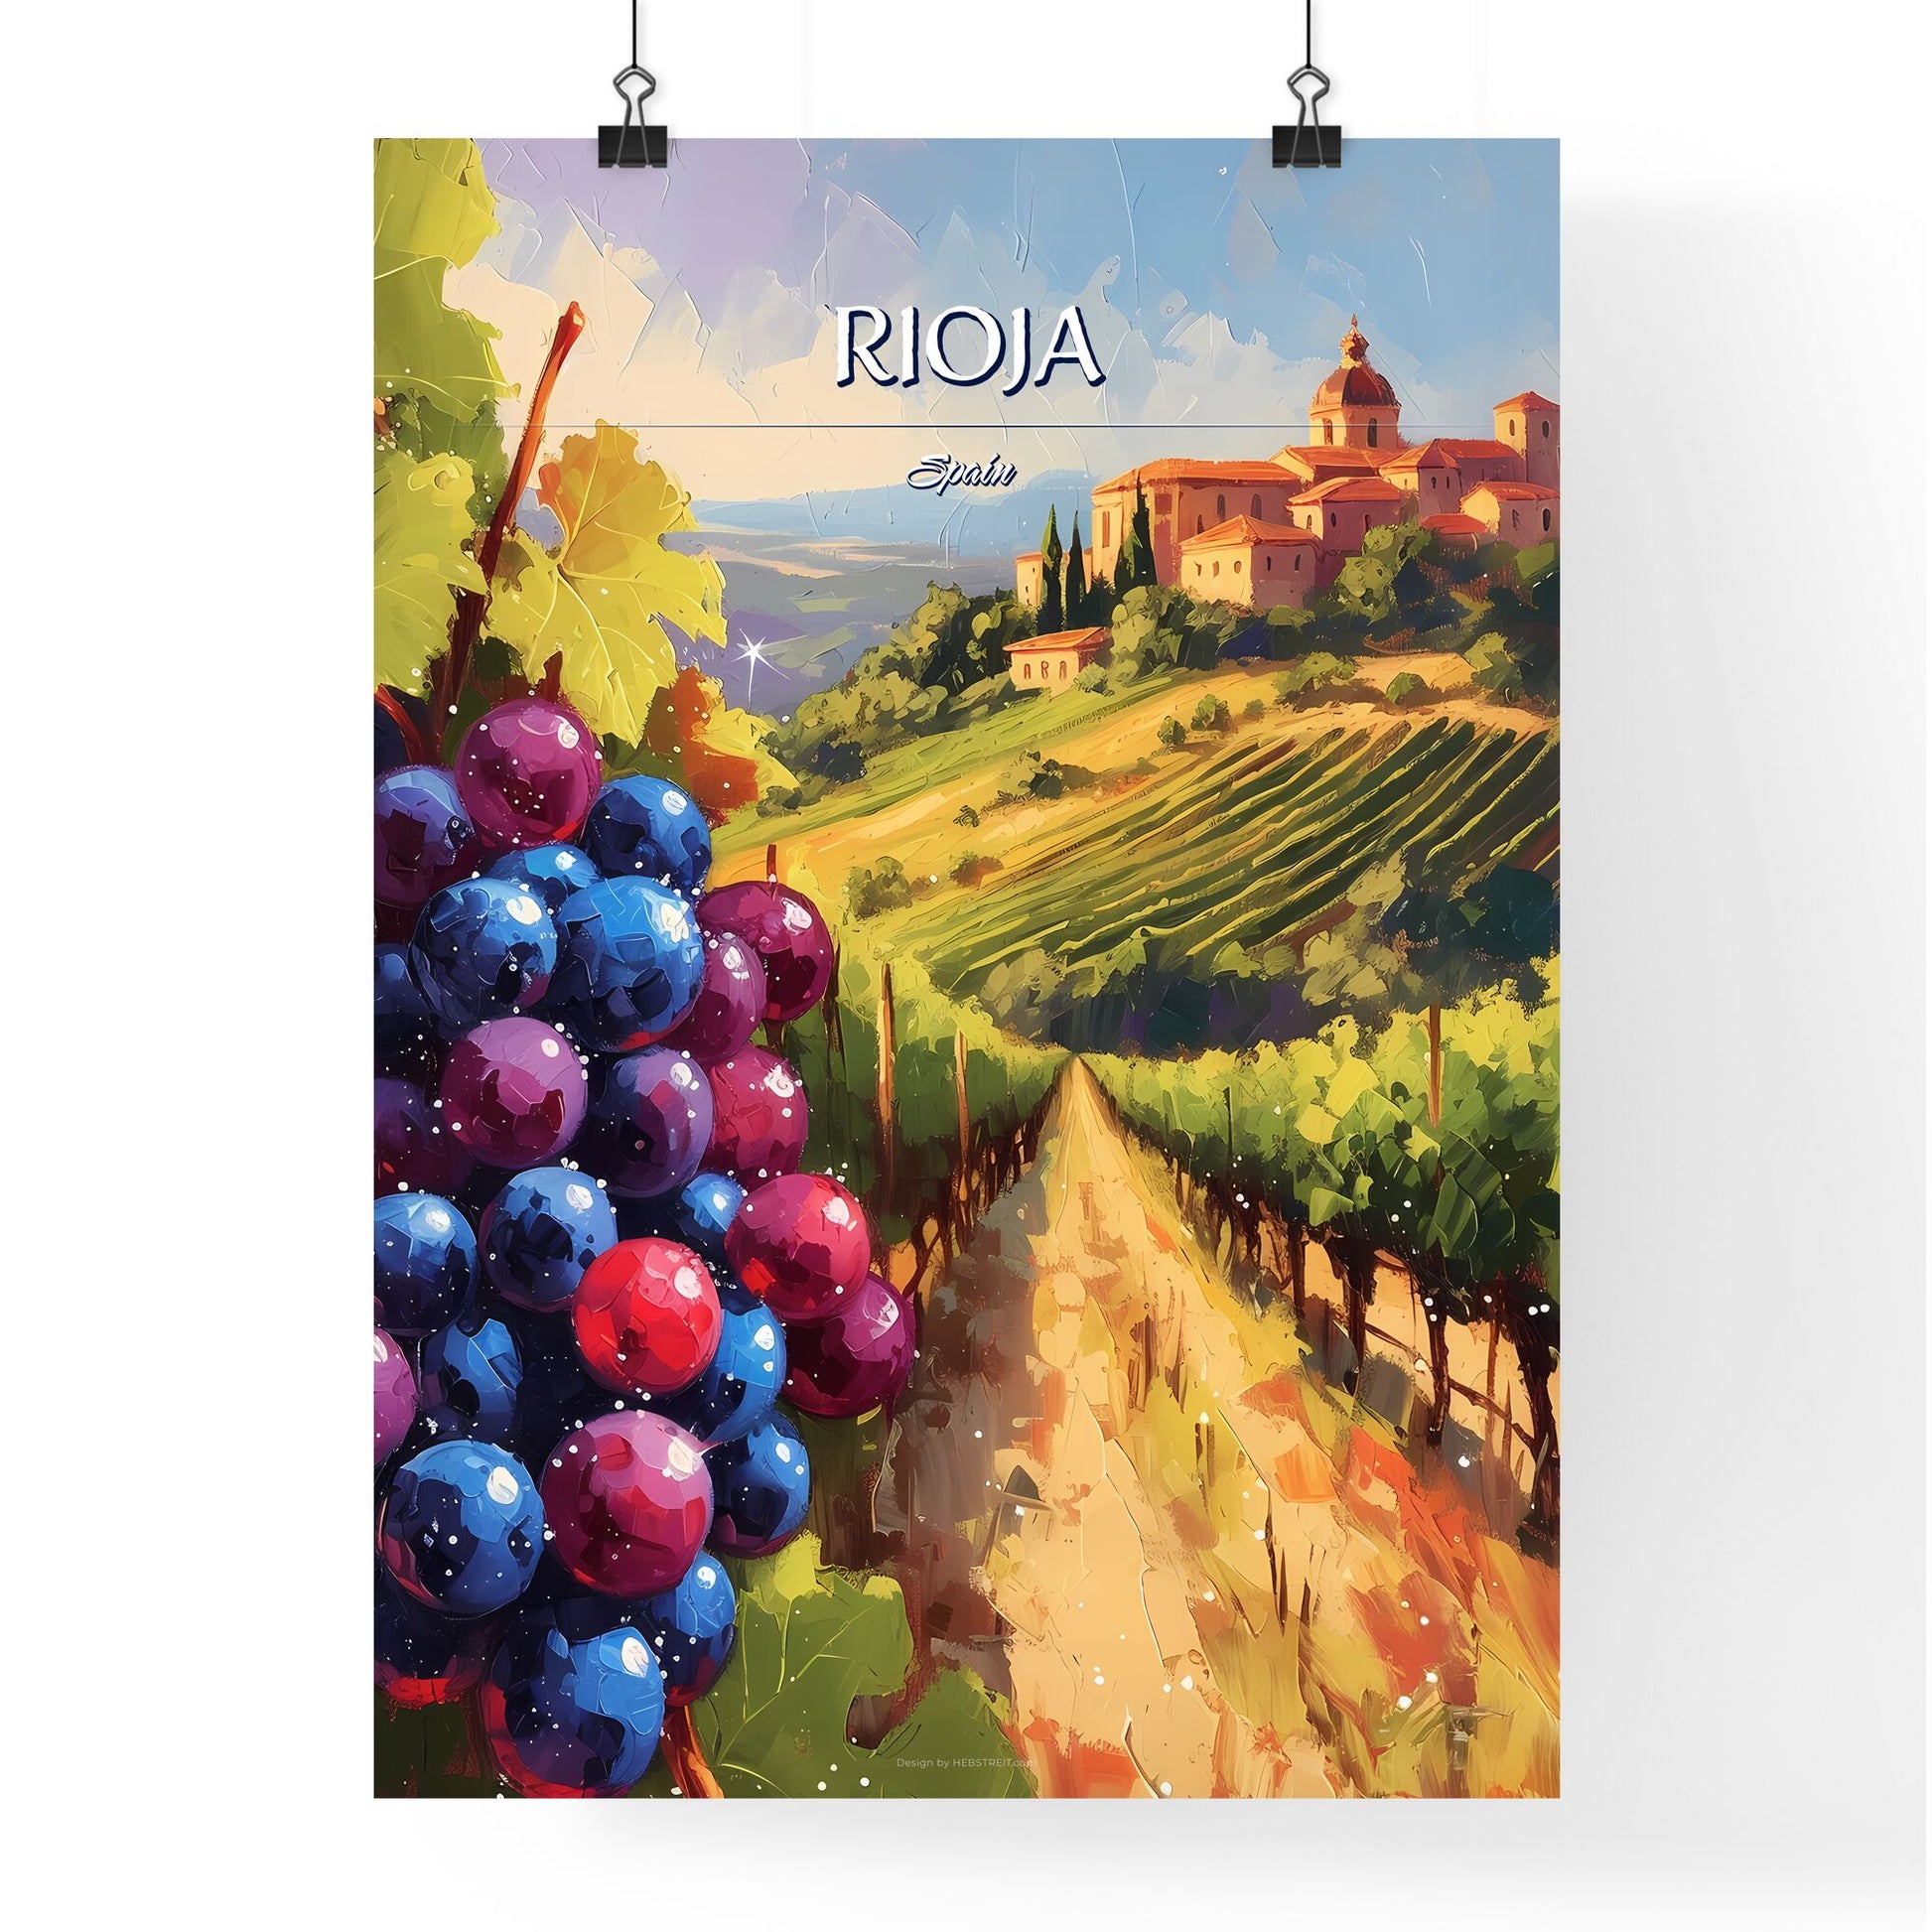 Rioja, Spain - Art print of a painting of a vineyard with a building in the background Default Title